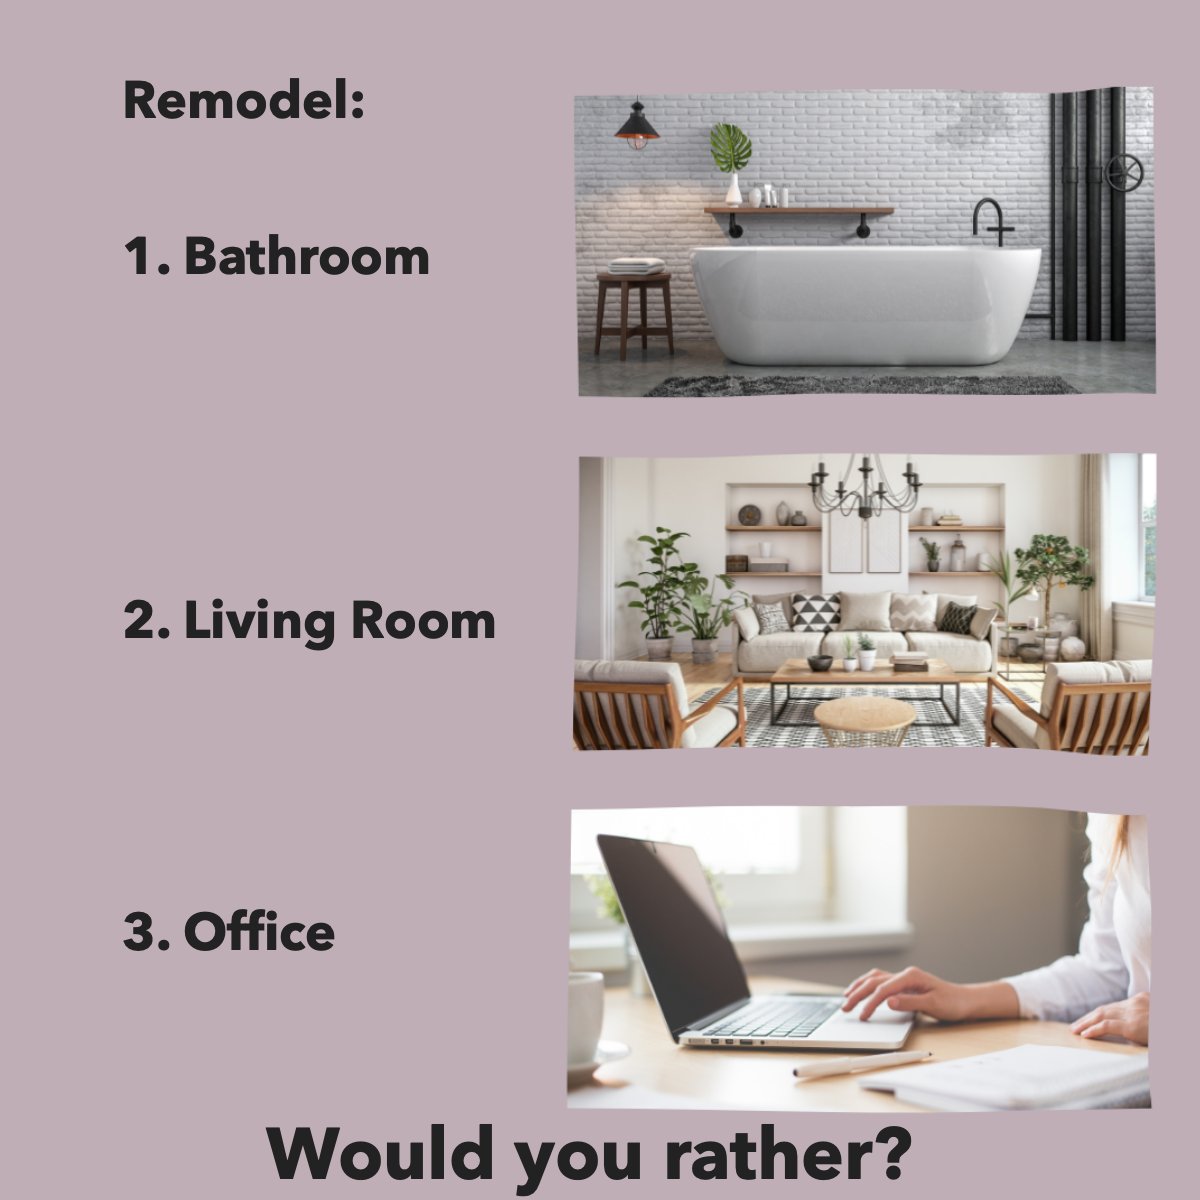 Which one would you rather remodel? ⚒

Tell us in the comments 💭

#remodel    #remodelproject    #homeimprovement    #homeremodeling
#myhousefl #realestate #Floridarealestate #sellyourhouse #buyyourhome #JoelSantos #MVPREALTY #LehighAcresFlorida #SWFLRealEstate